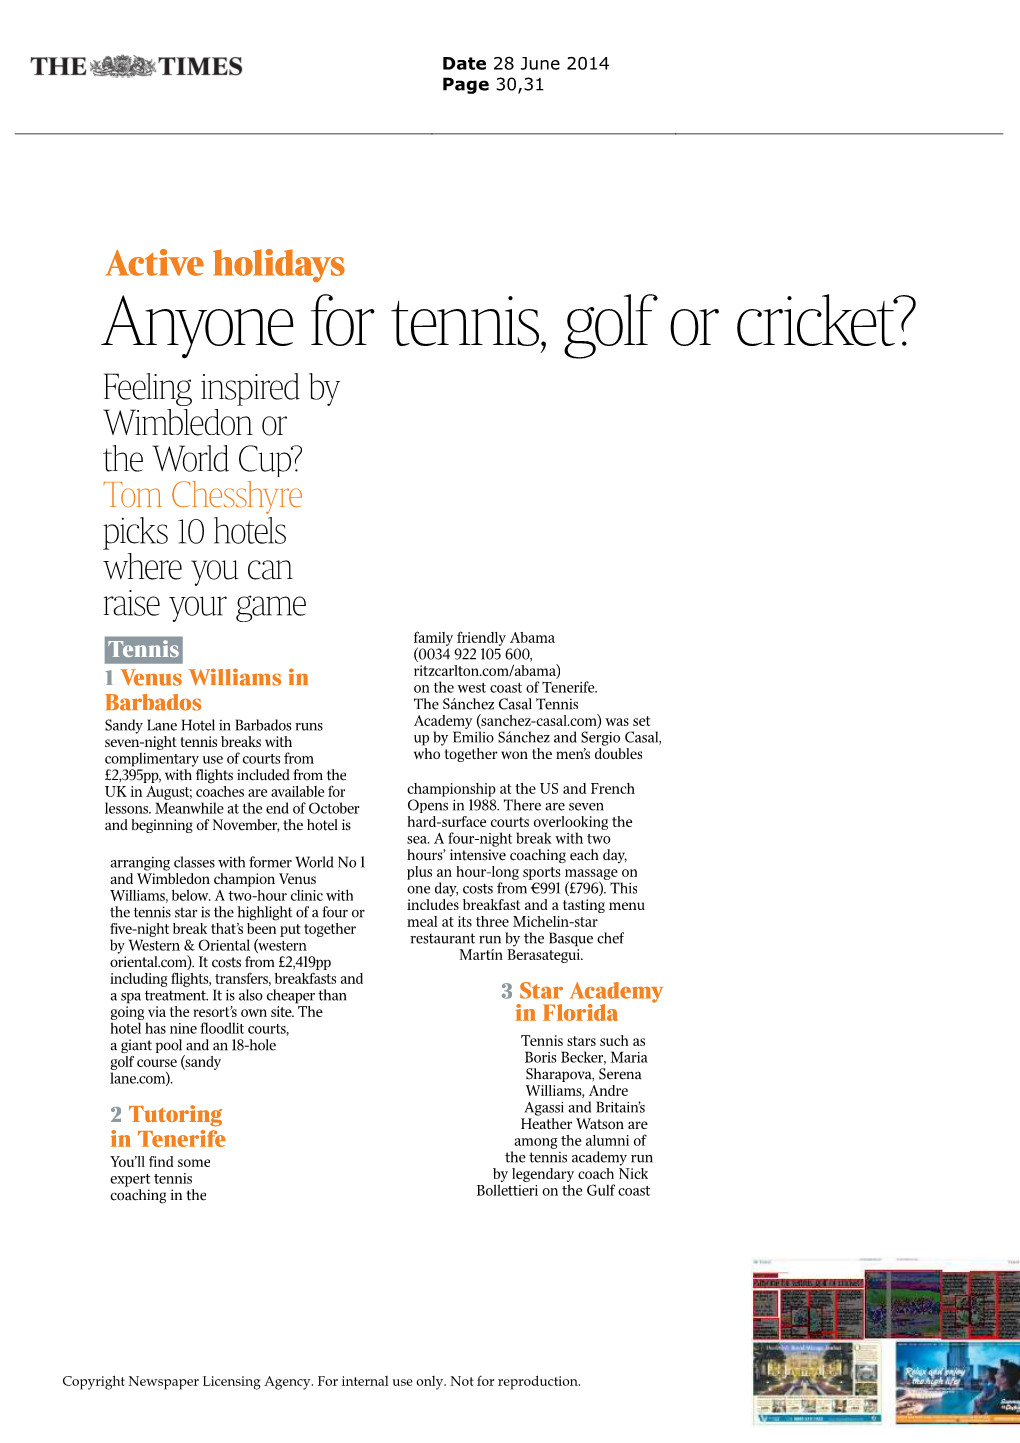 Anyone for Tennis, Golf Or Cricket?